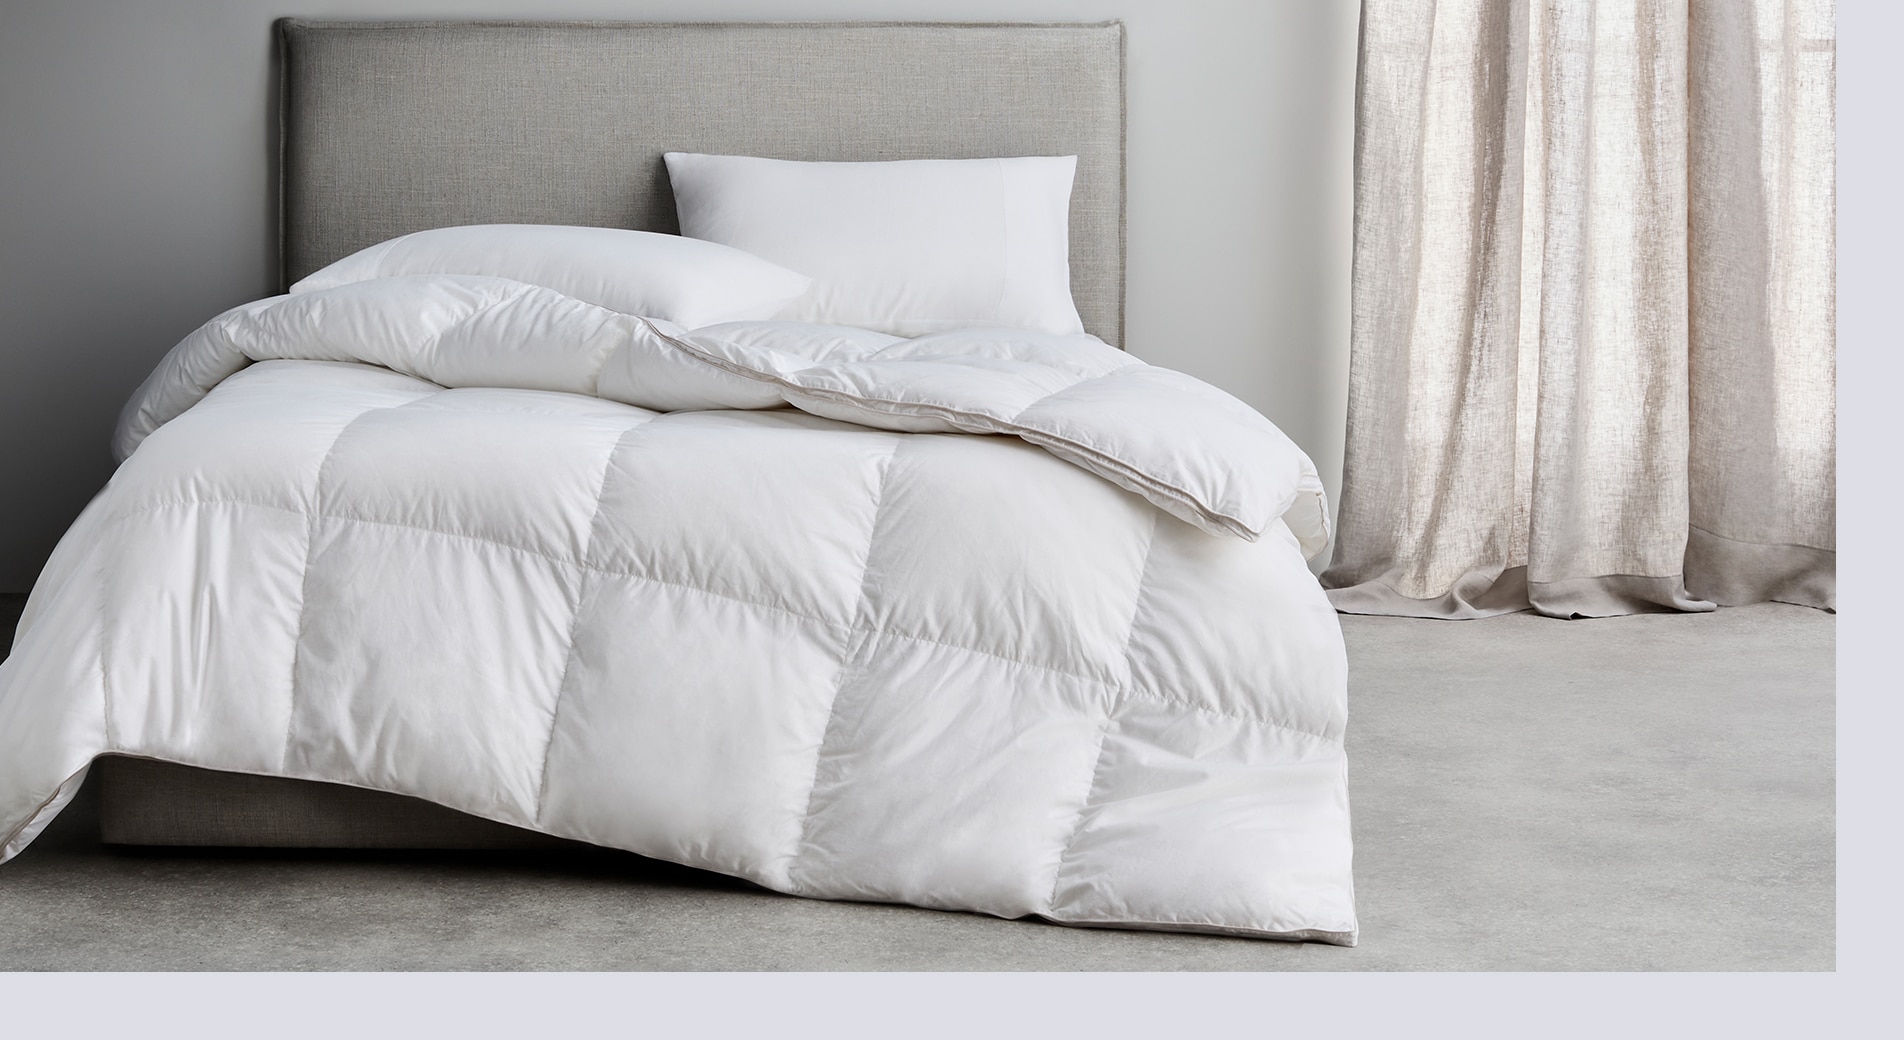 how to keep your bed warm in winter. feather and down quilt laid on bed with grey headboard, in room with grey walls and floor.